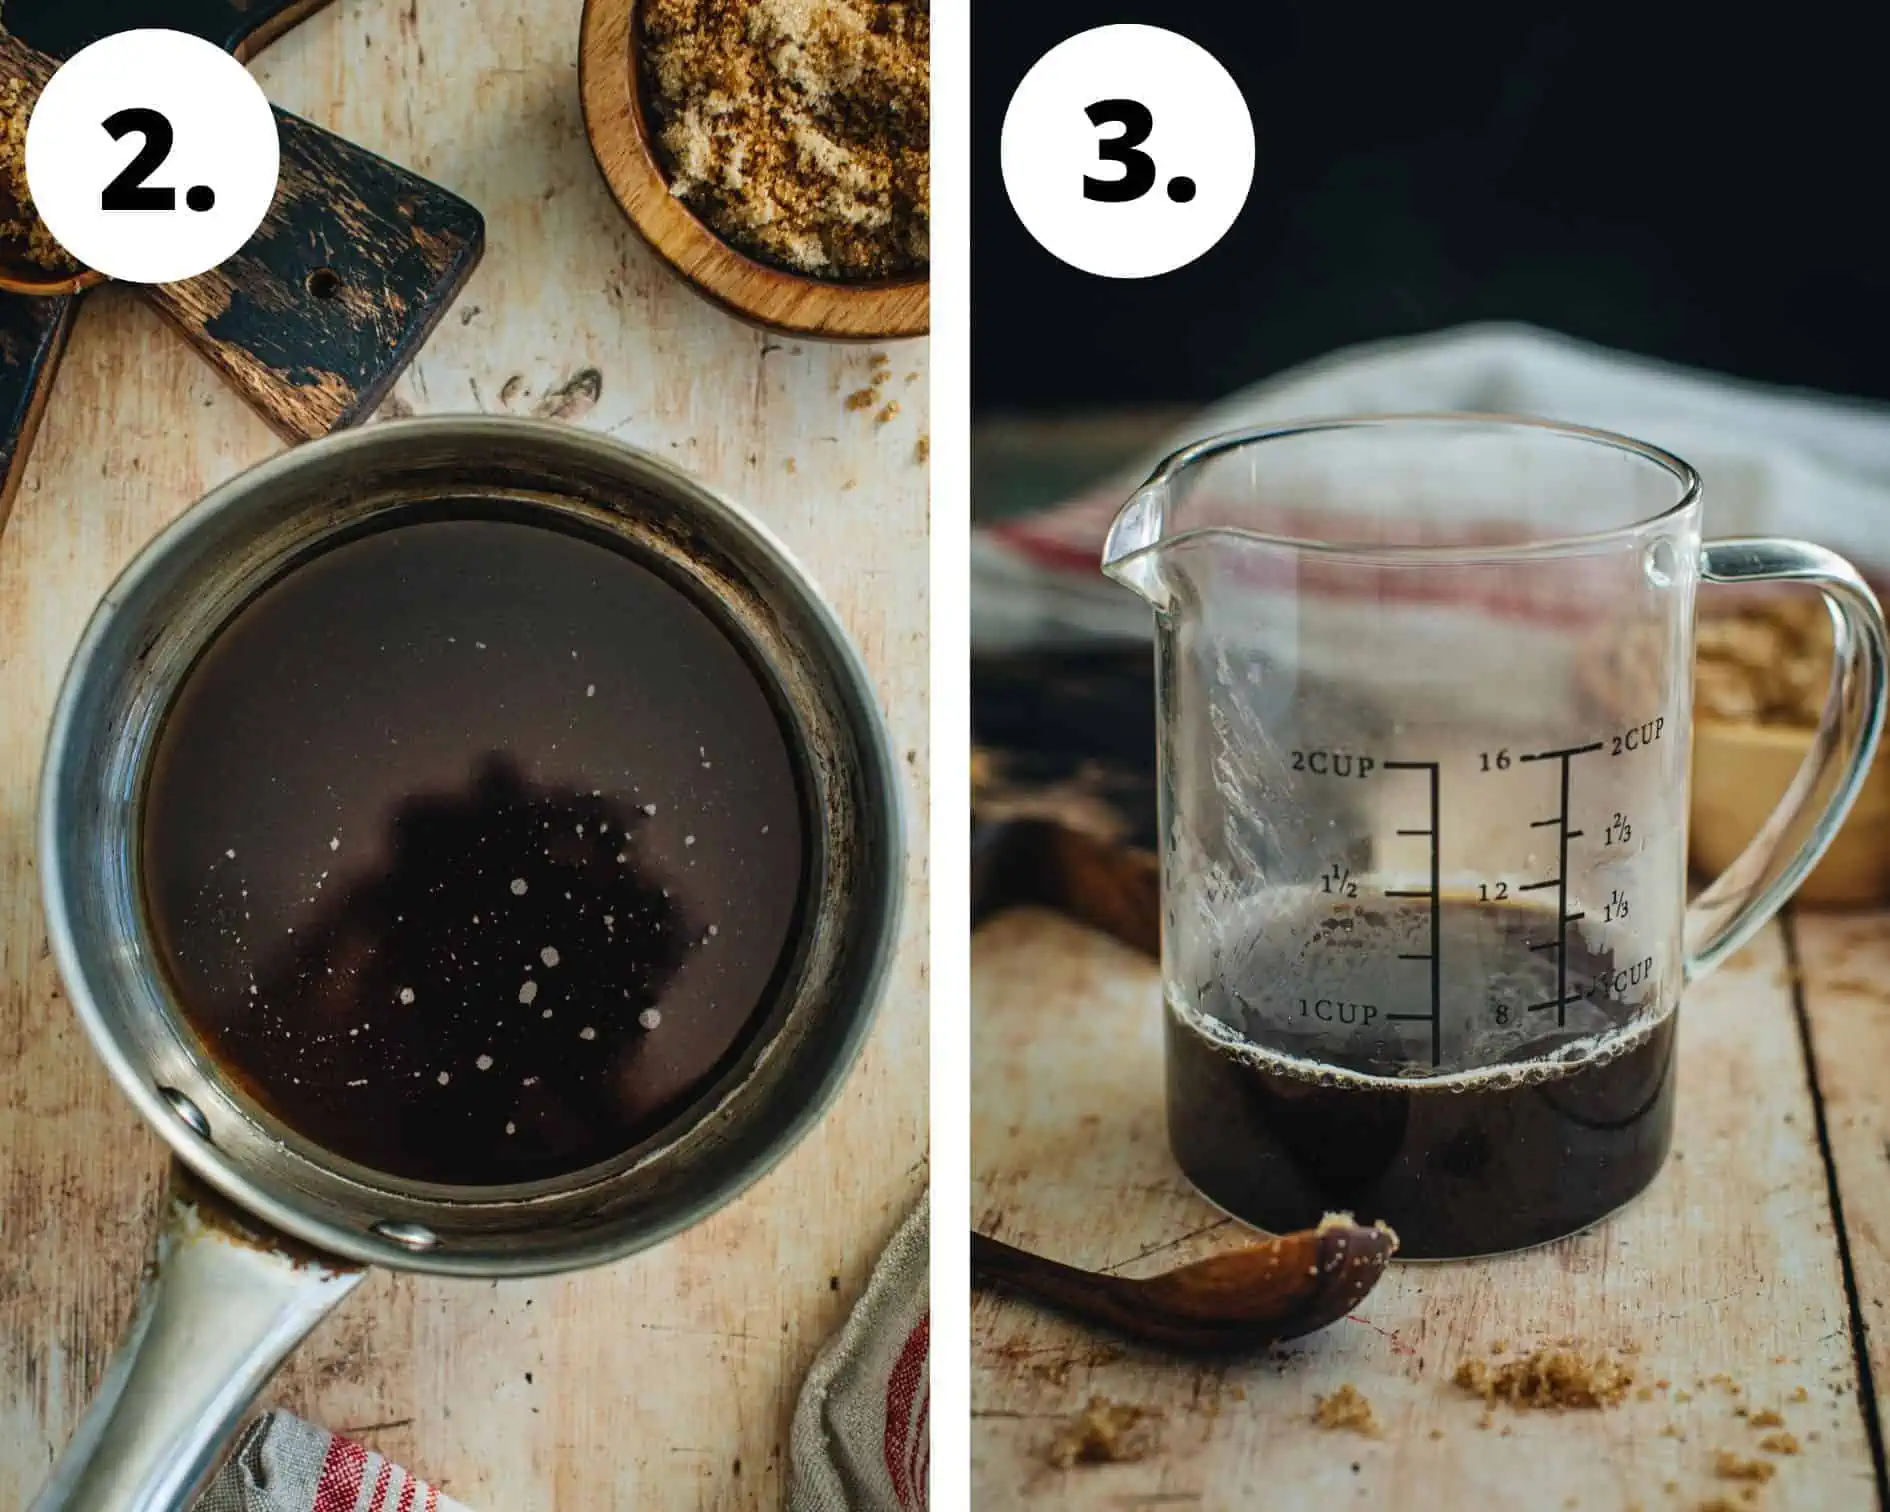 Process steps 2 and 3 for how to make brown sugar syrup.